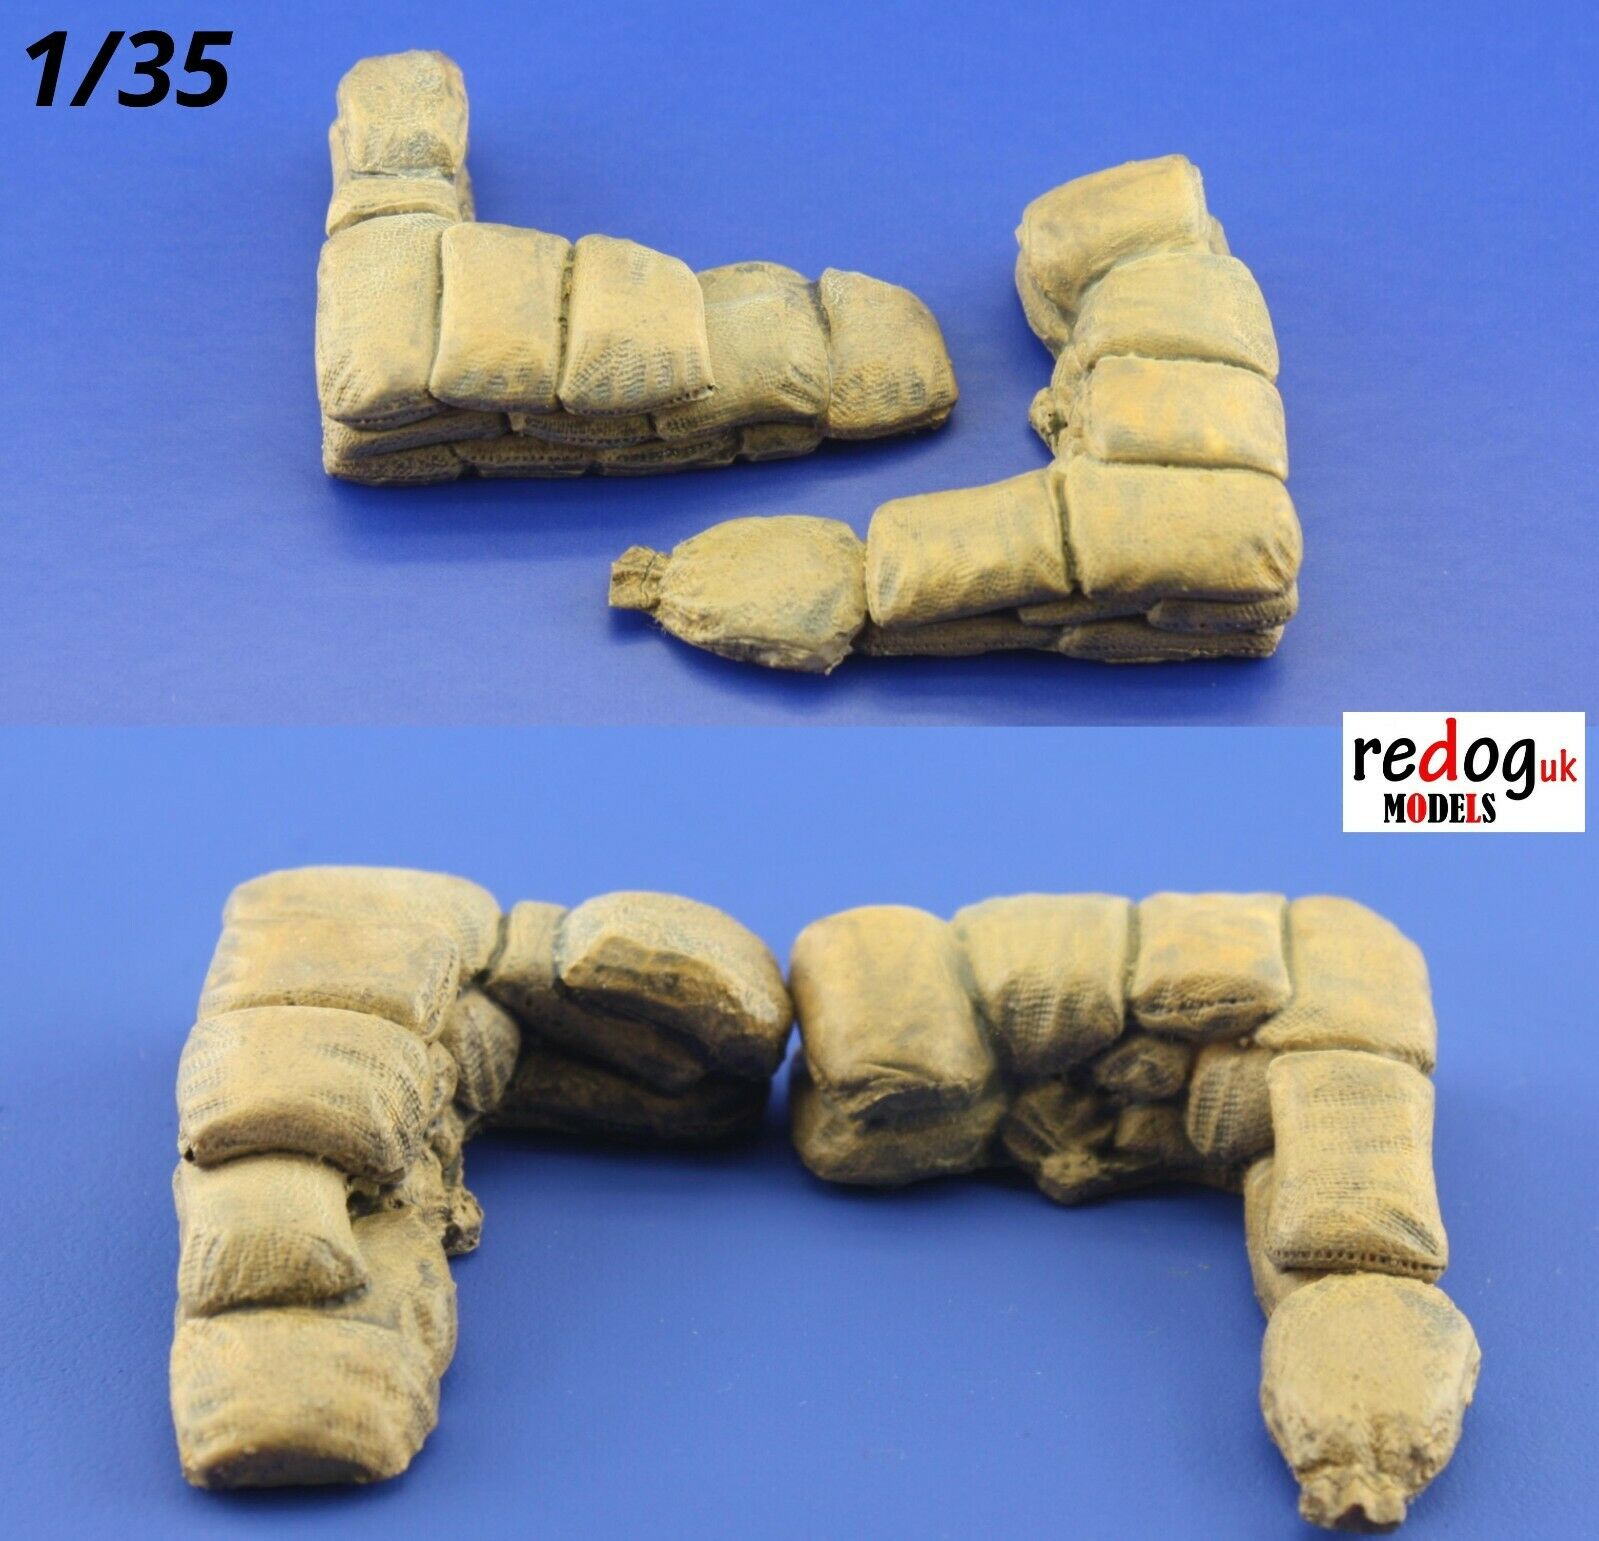 Redog 1/35 Military Sandbags for Trenches Scale Model Resin Diorama Kit 16 - redoguk